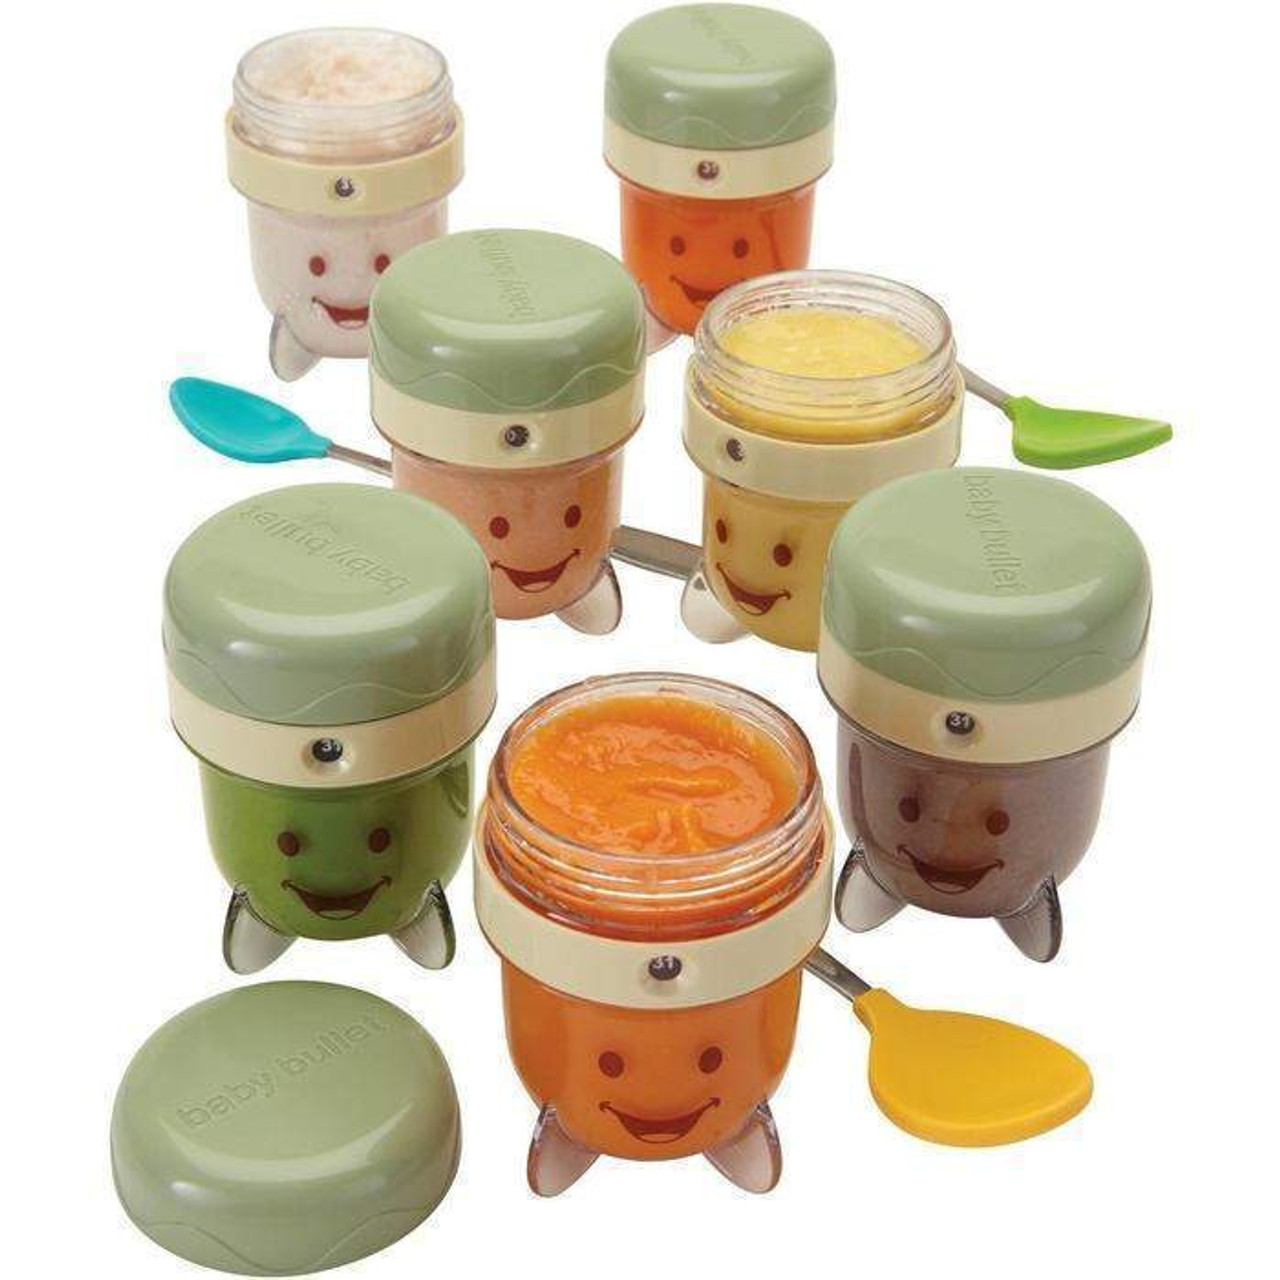 Shop 20 Pieces Baby Bullet feeding Set Online In SA